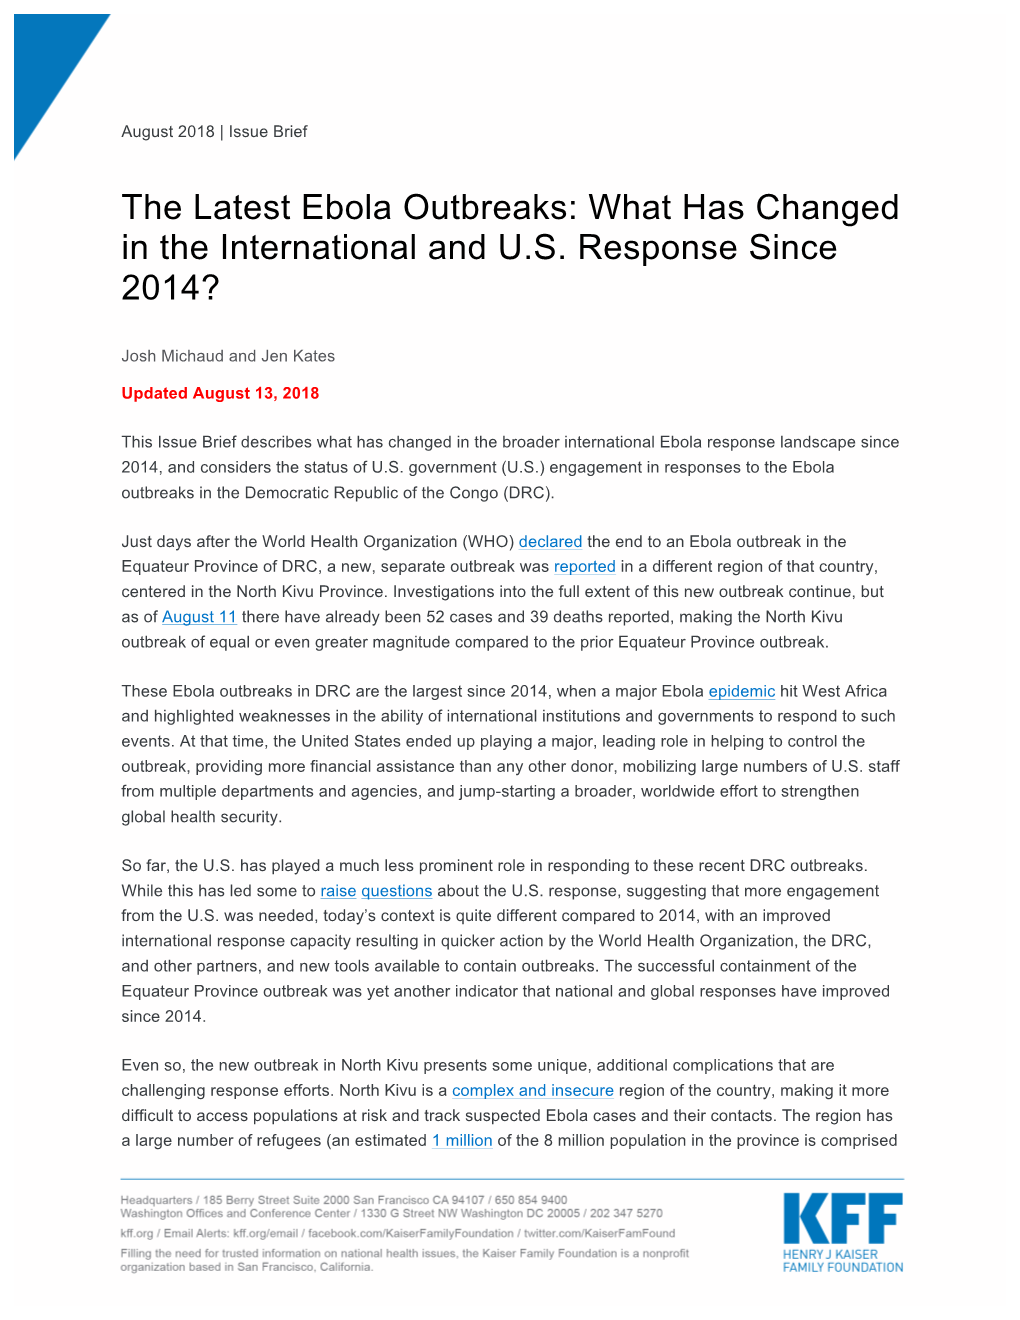 The Latest Ebola Outbreaks: What Has Changed in the International and U.S